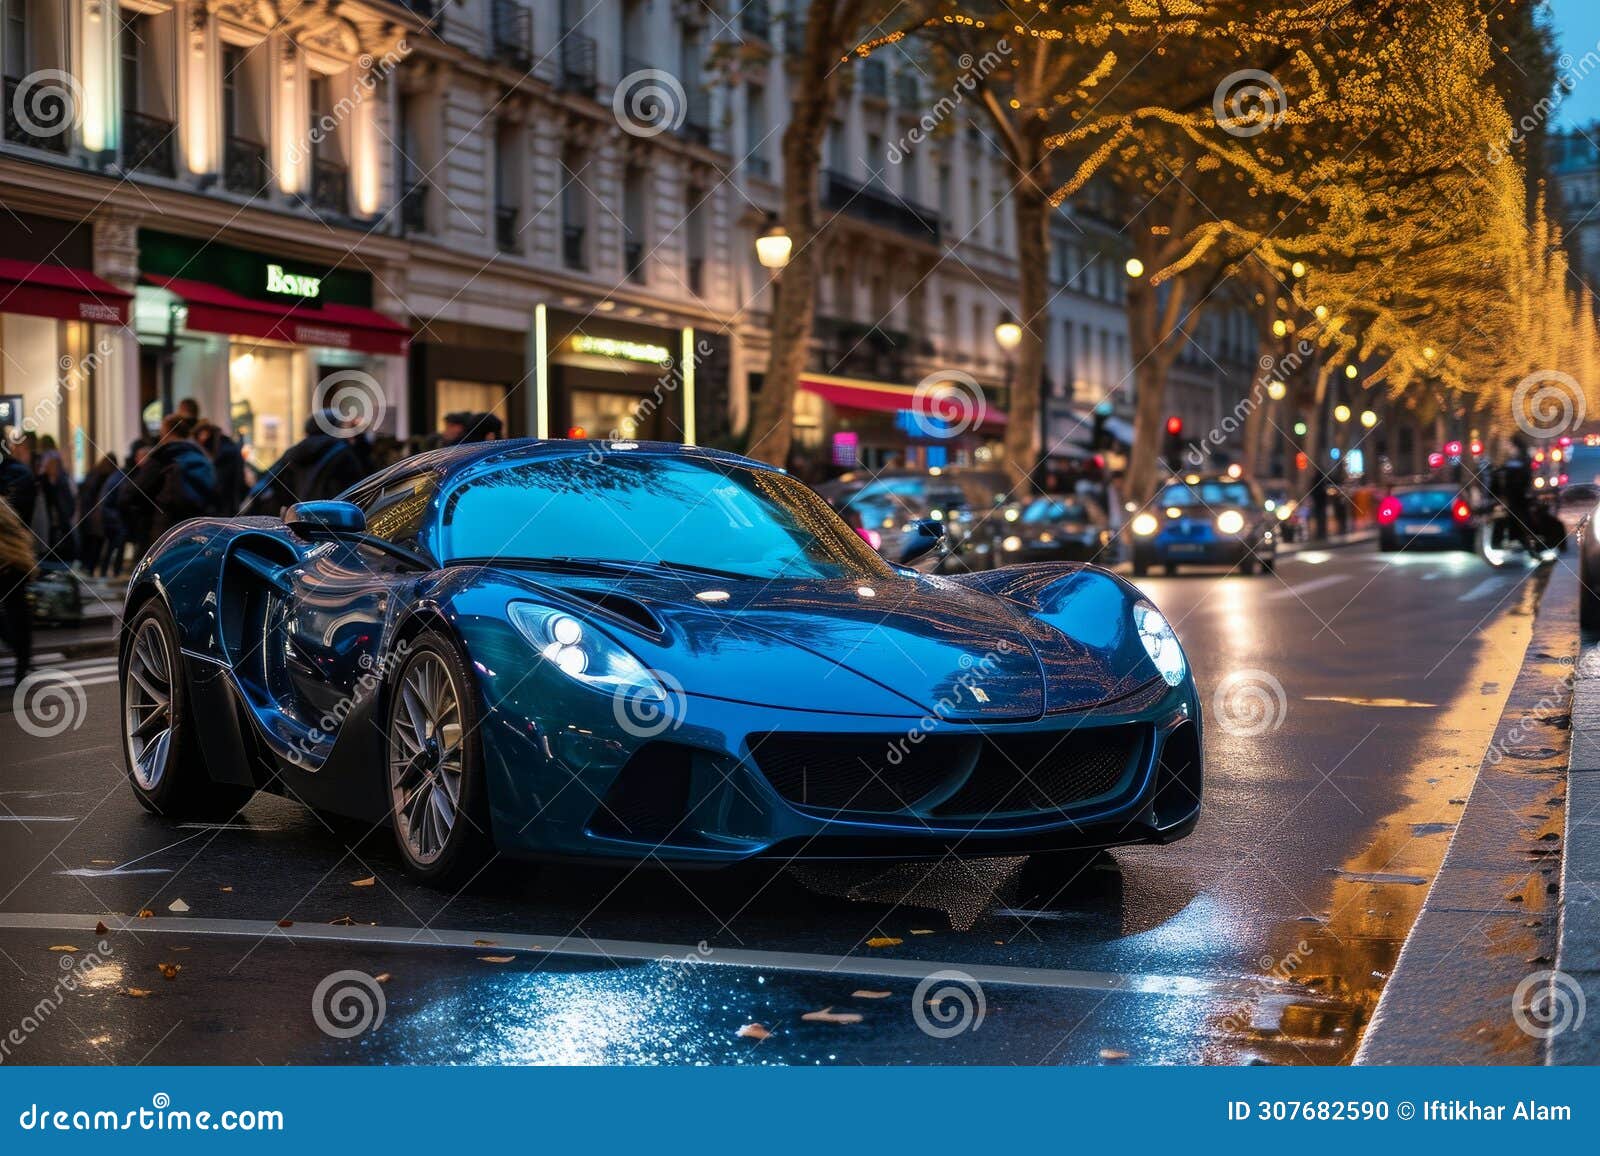 a blue sports car is parked on the side of the road, its sleek  catching the eye of passersby, a shiny, blue sports car